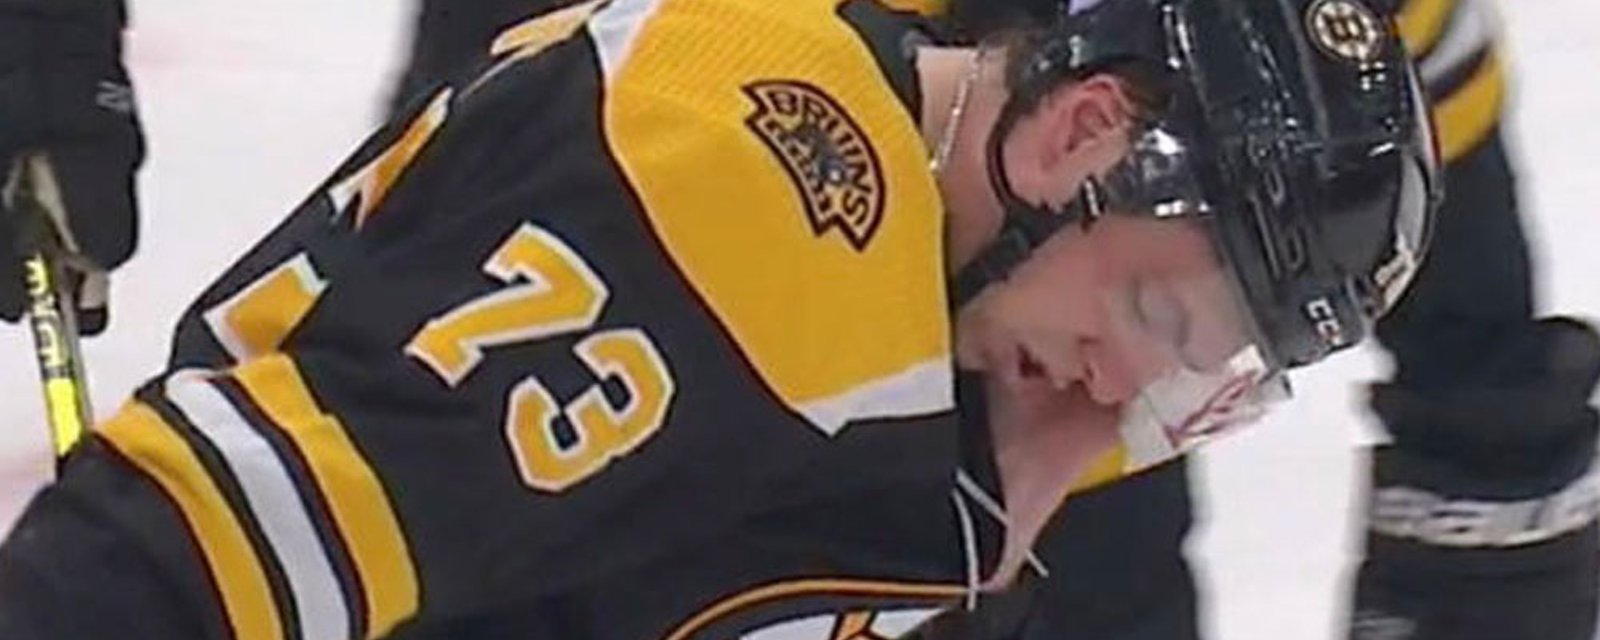 Bruins receive the worst possible injury in tonight's game against Leafs 